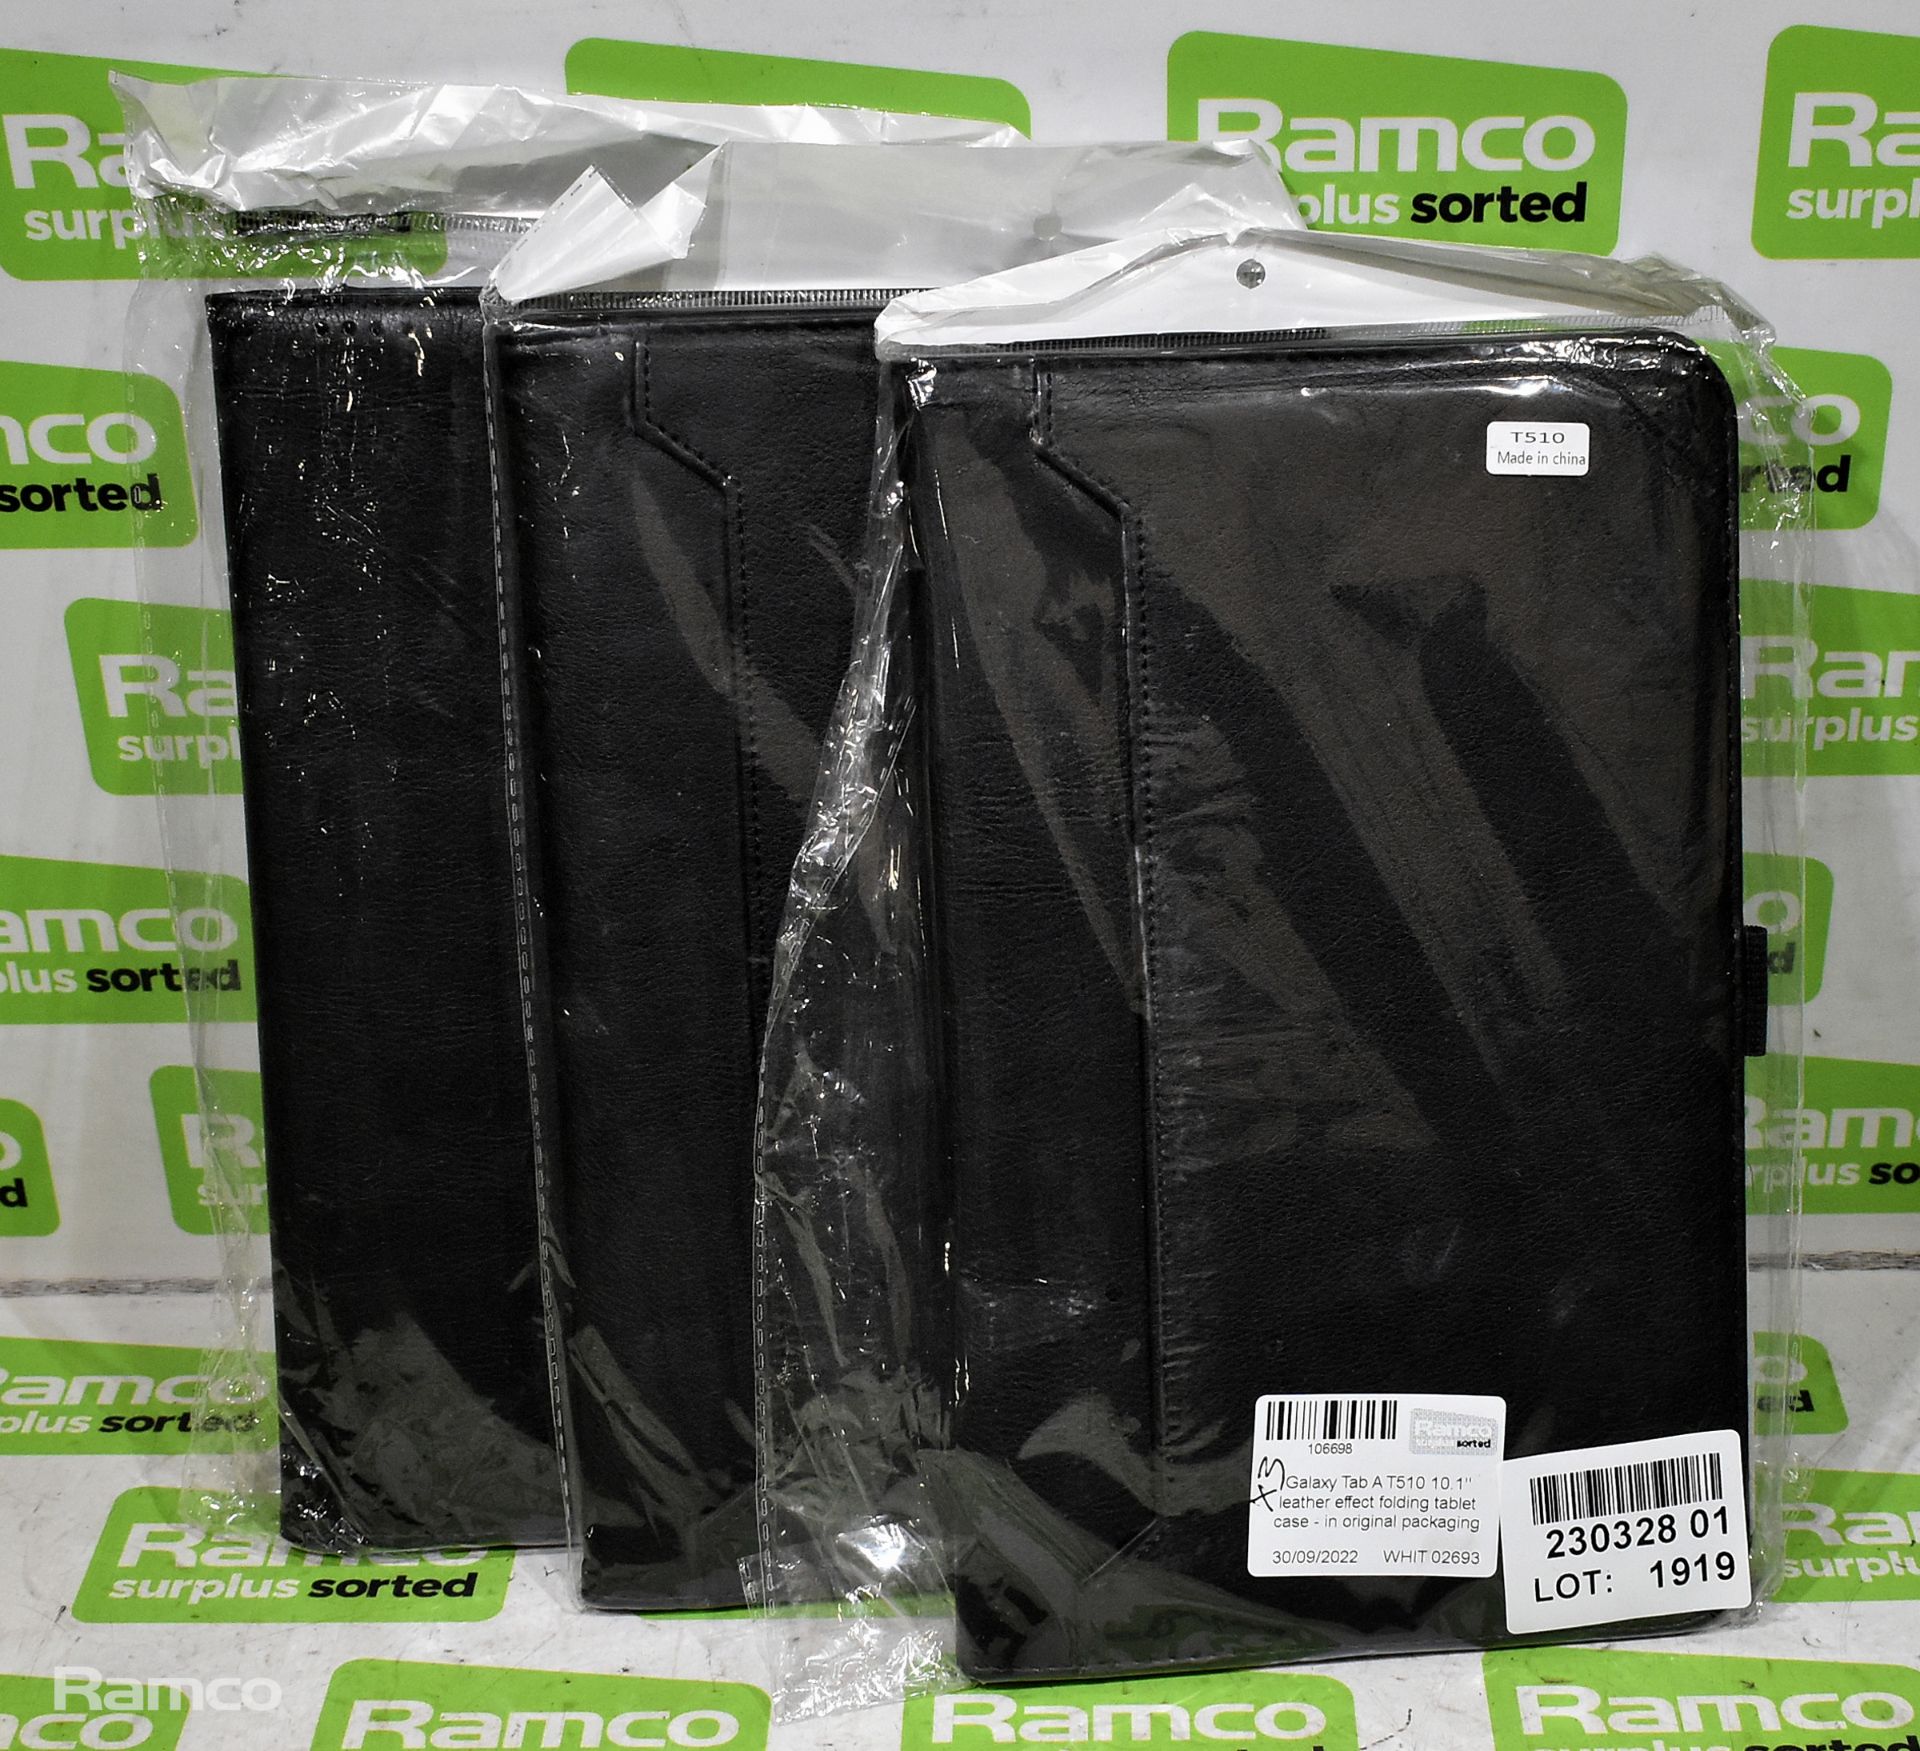 3x Galaxy Tab A T510 10.1 inch leather effect folding tablet cases - in original packaging